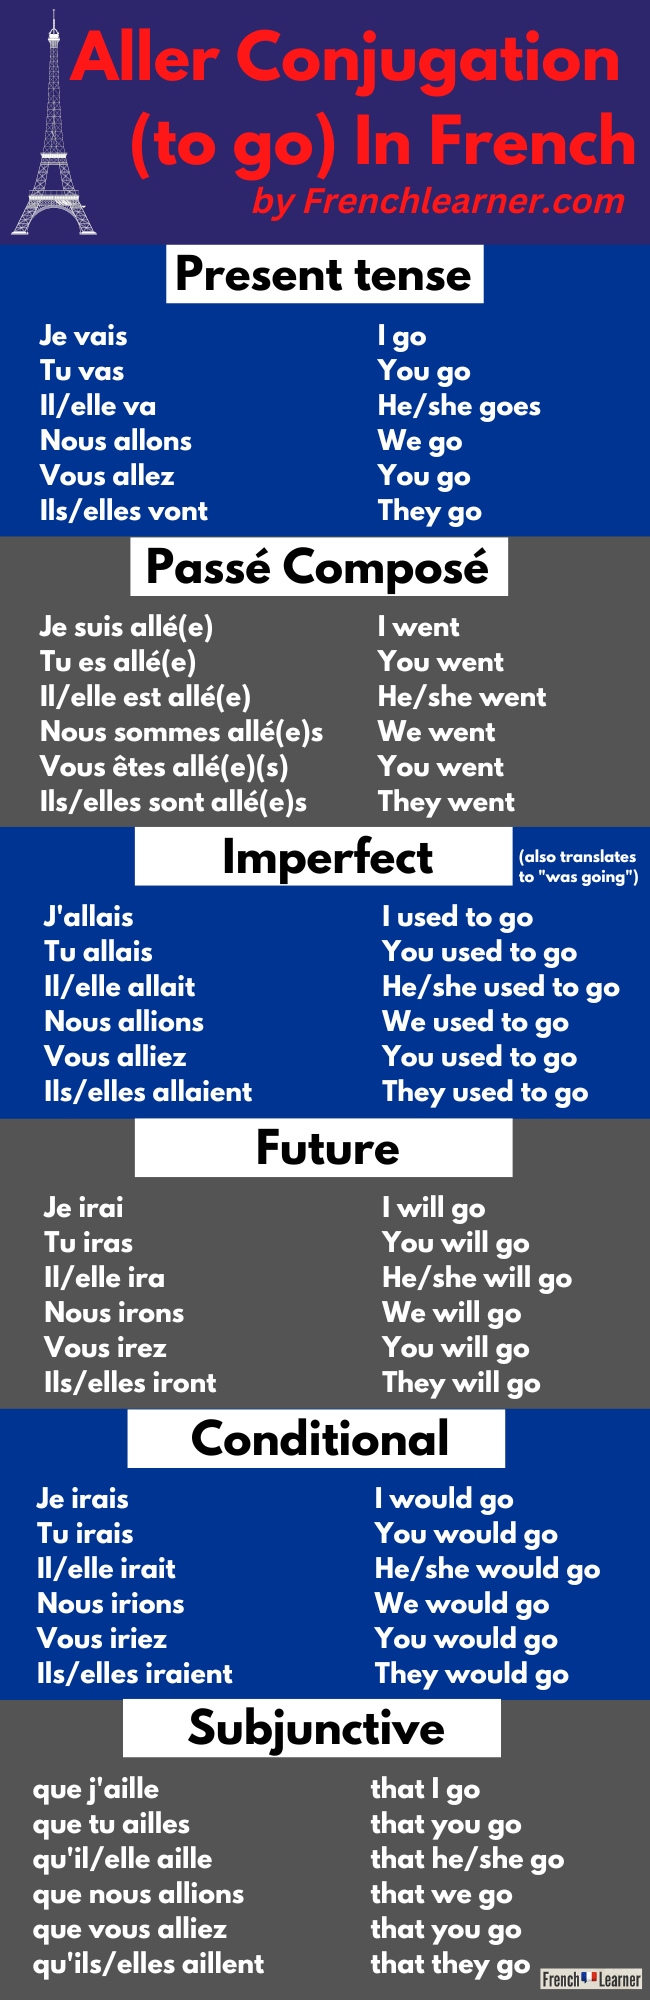 Je Suis Allé Conjugaison Aller Conjugation: How To Conjugate The Verb To Go In French